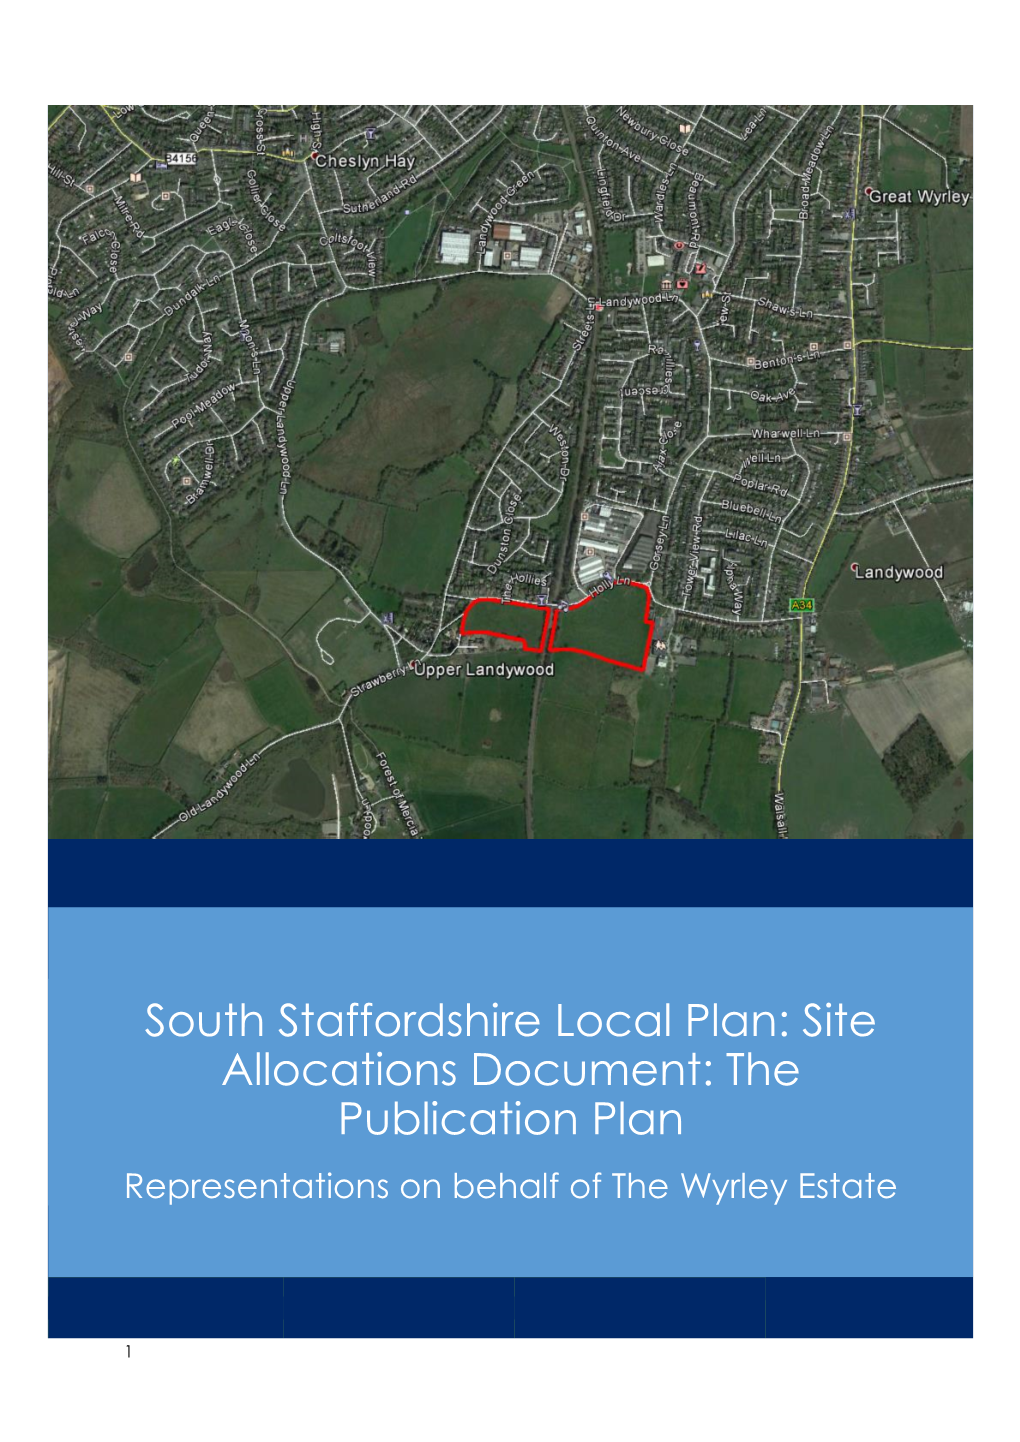 South Staffordshire Local Plan: Site Allocations Document: the Publication Plan